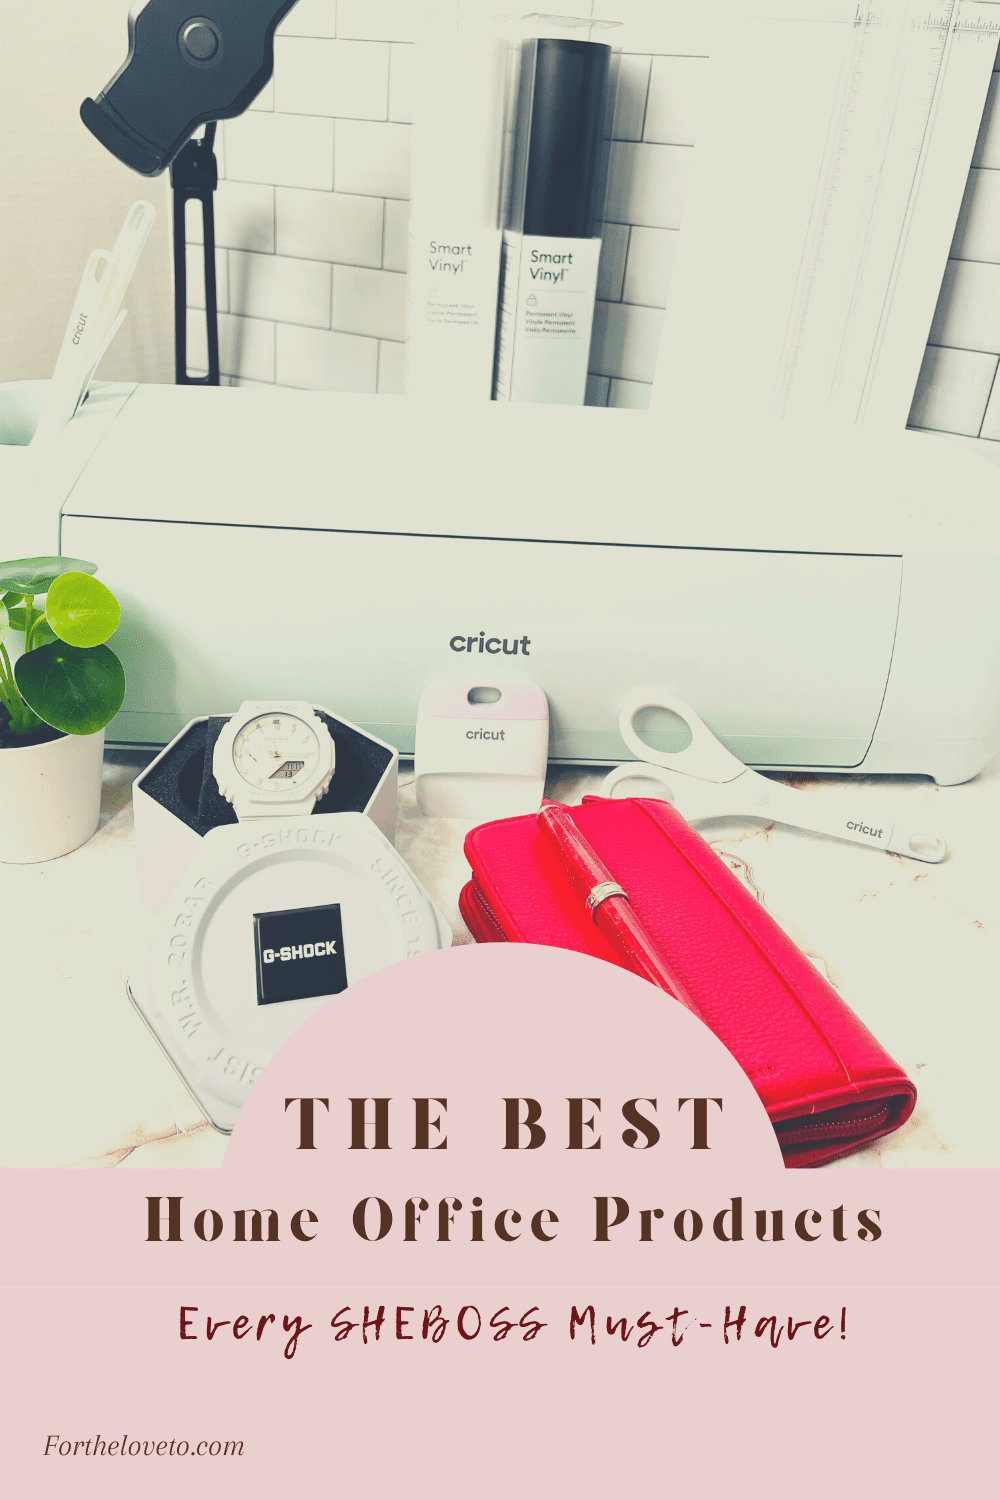 The Best Home Office Products Every SHEBOSS Must-Have! post thumbnail image